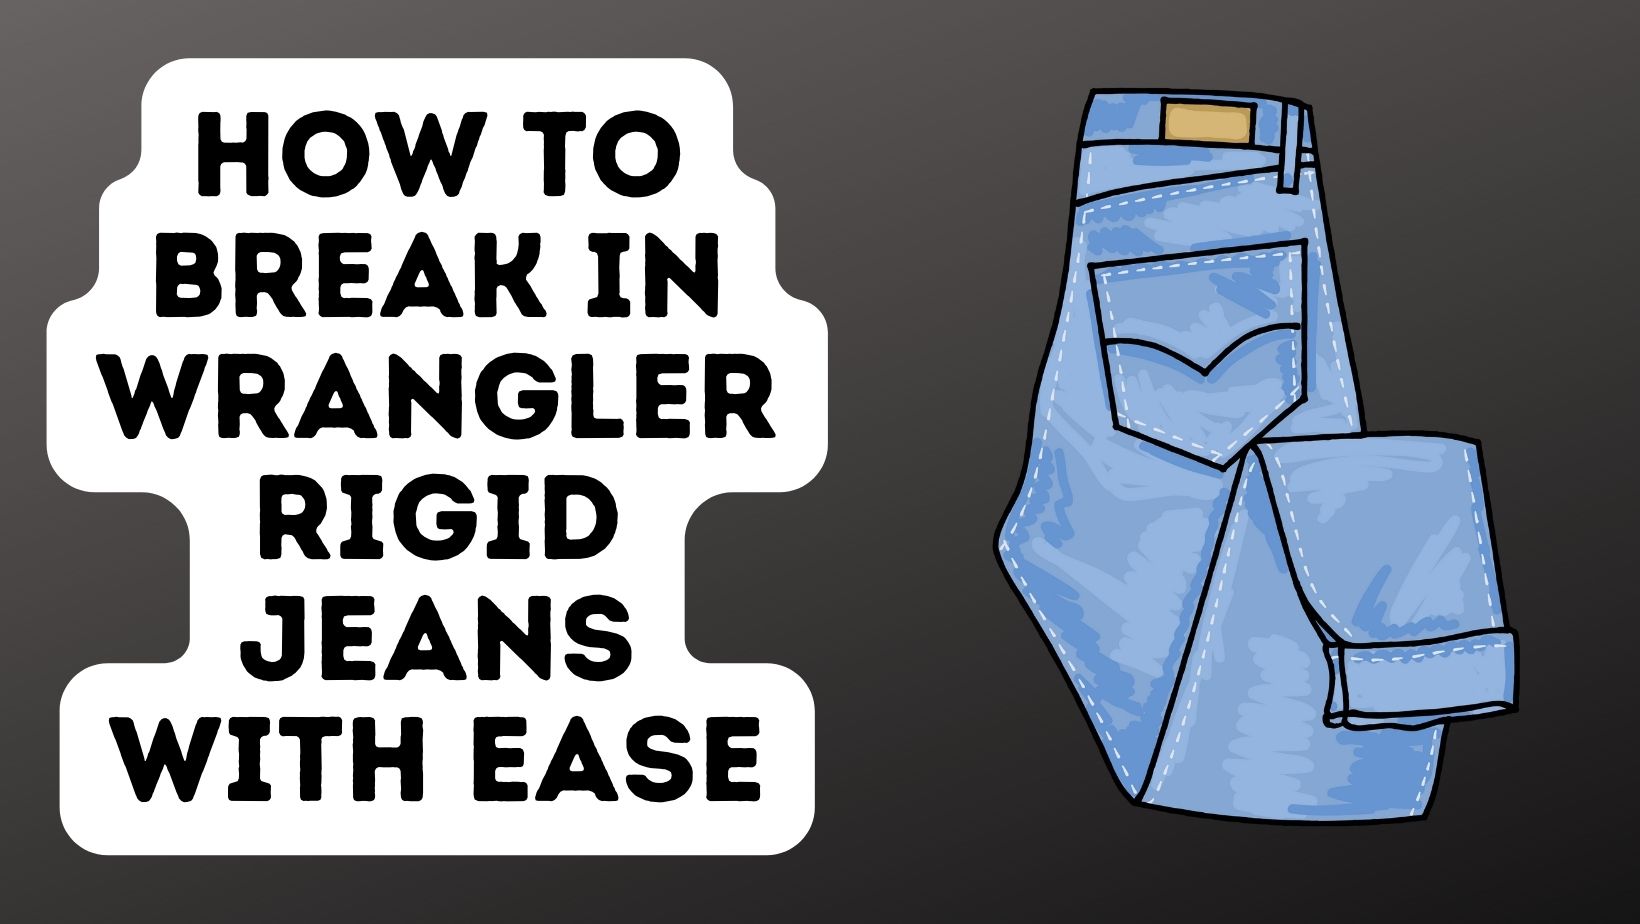 How To Break In Wrangler Rigid Jeans With Ease